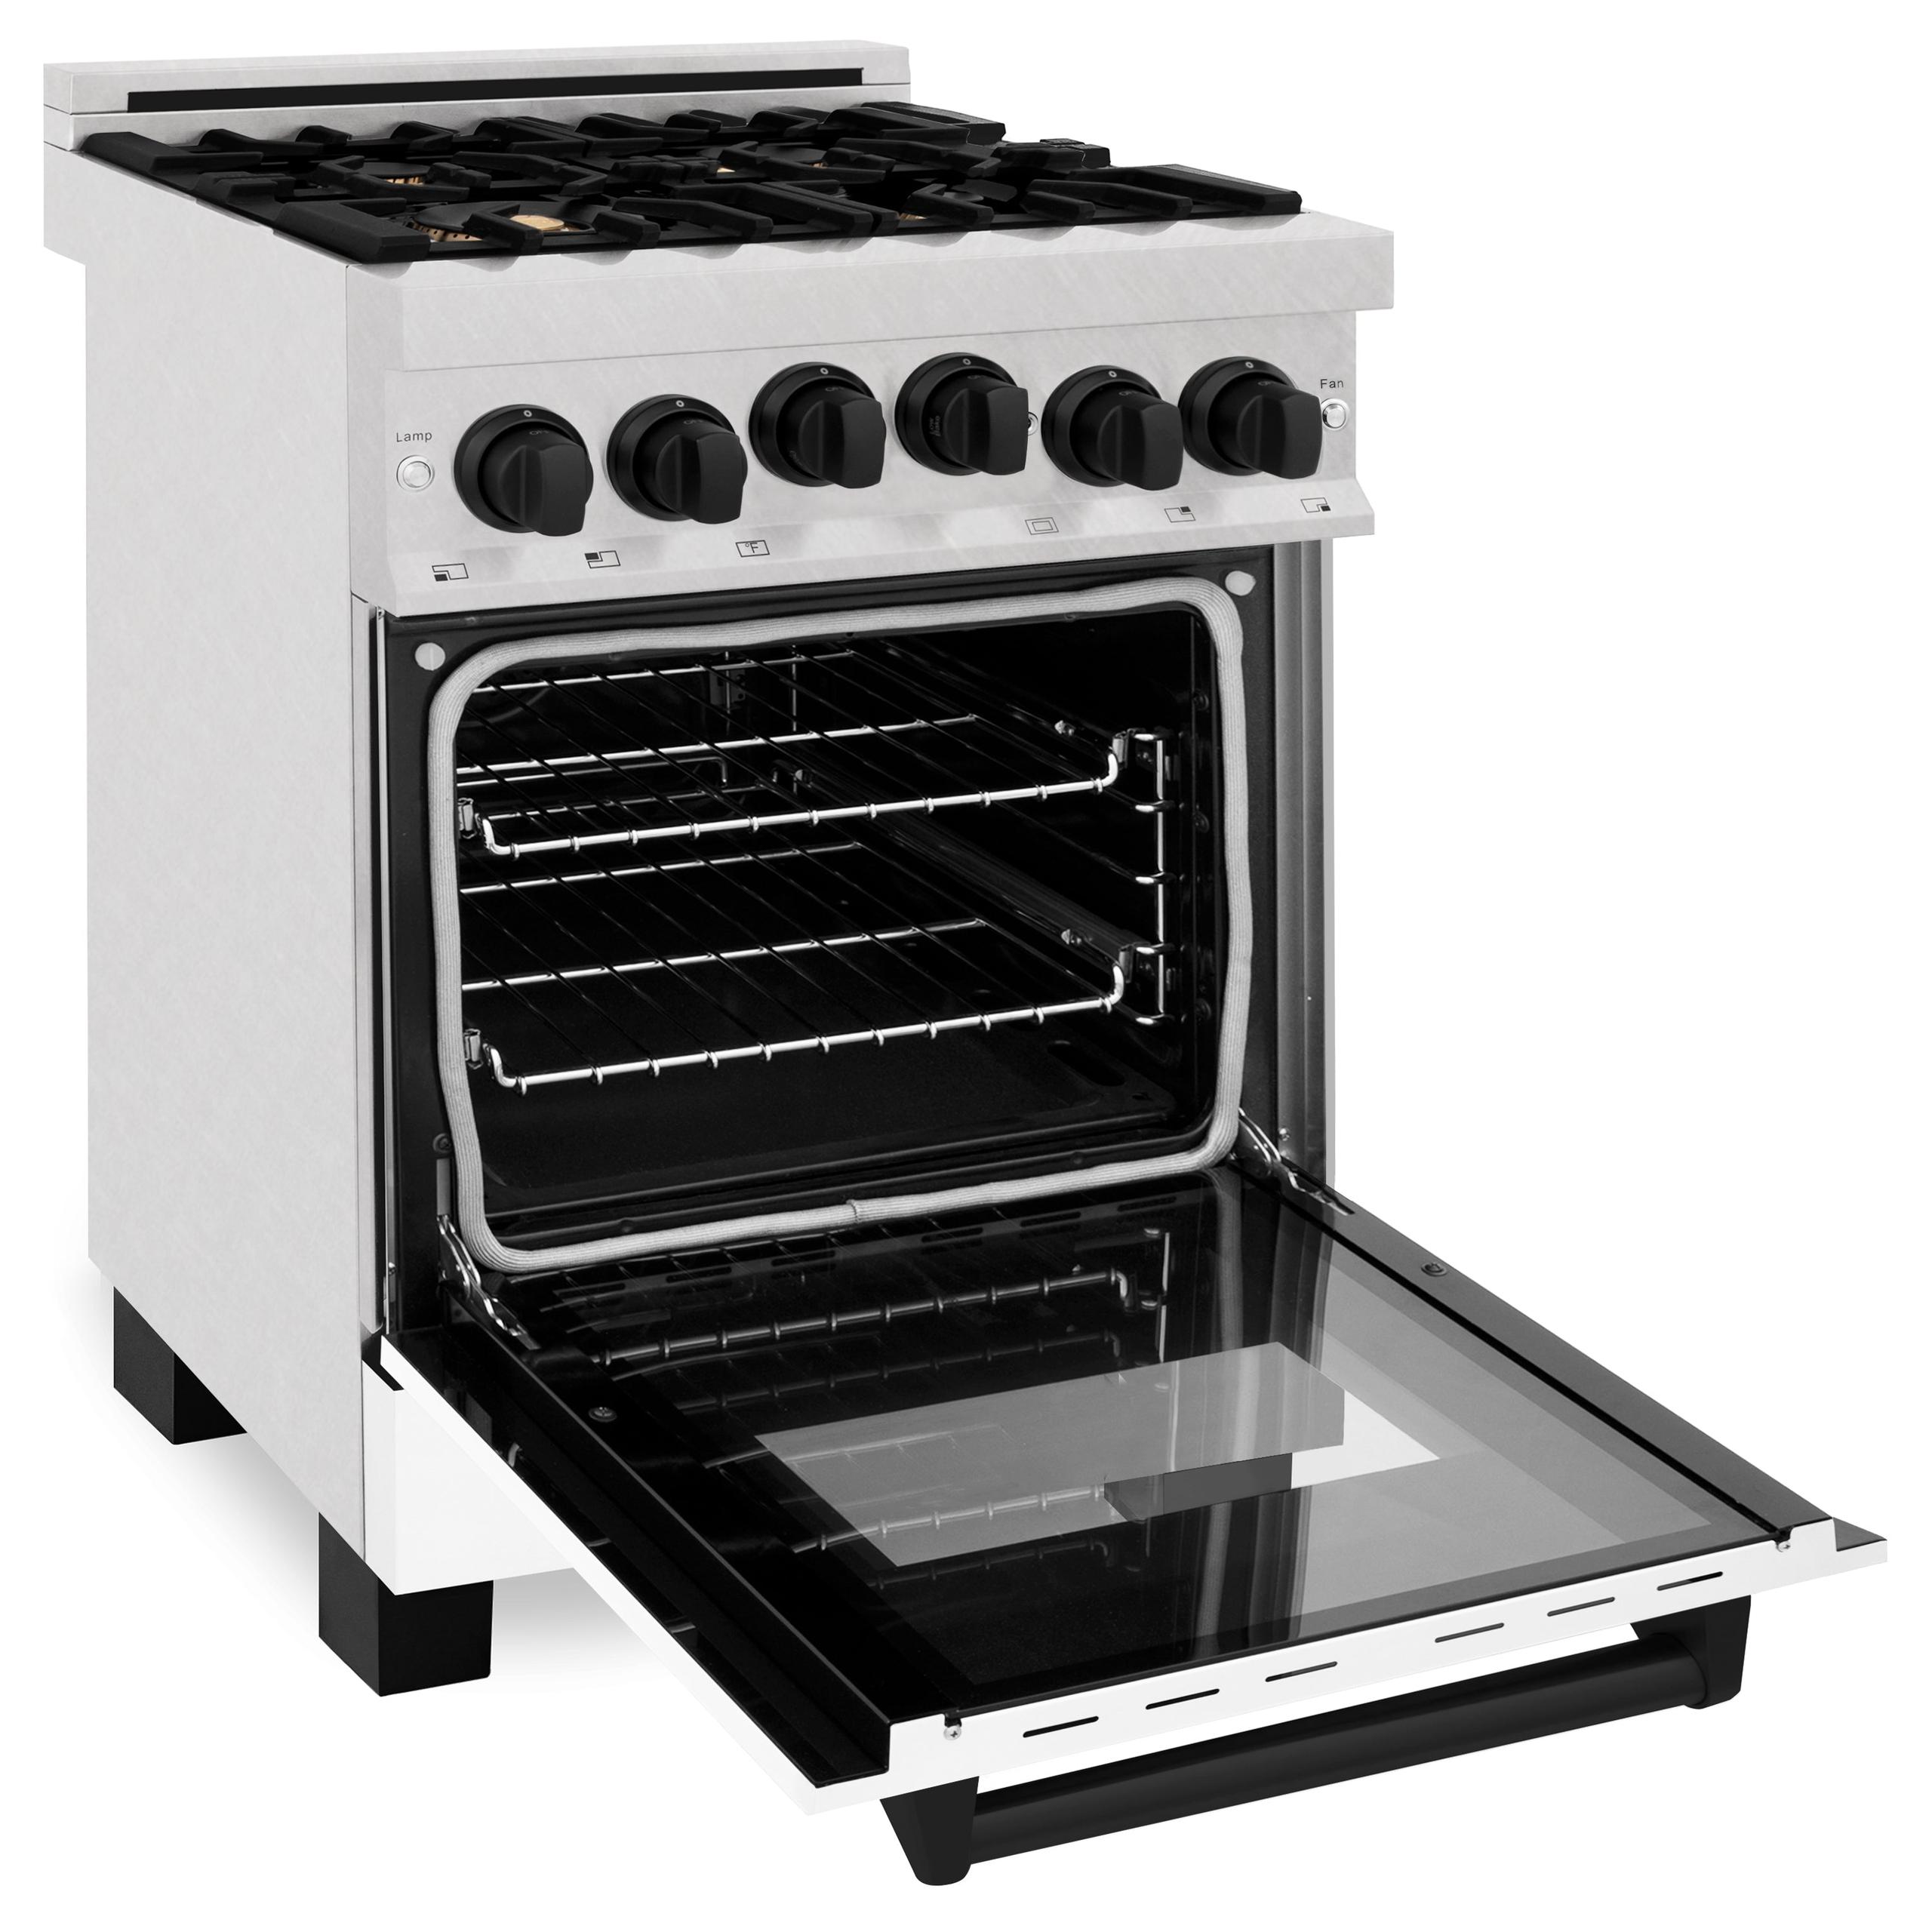 ZLINE KITCHEN AND BATH RGSZWM24CB ZLINE Autograph Edition 24" 2.8 cu. ft. Range with Gas Stove and Gas Oven in DuraSnow R Stainless Steel with White Matte Door and Accents Color: Champagne Bronze